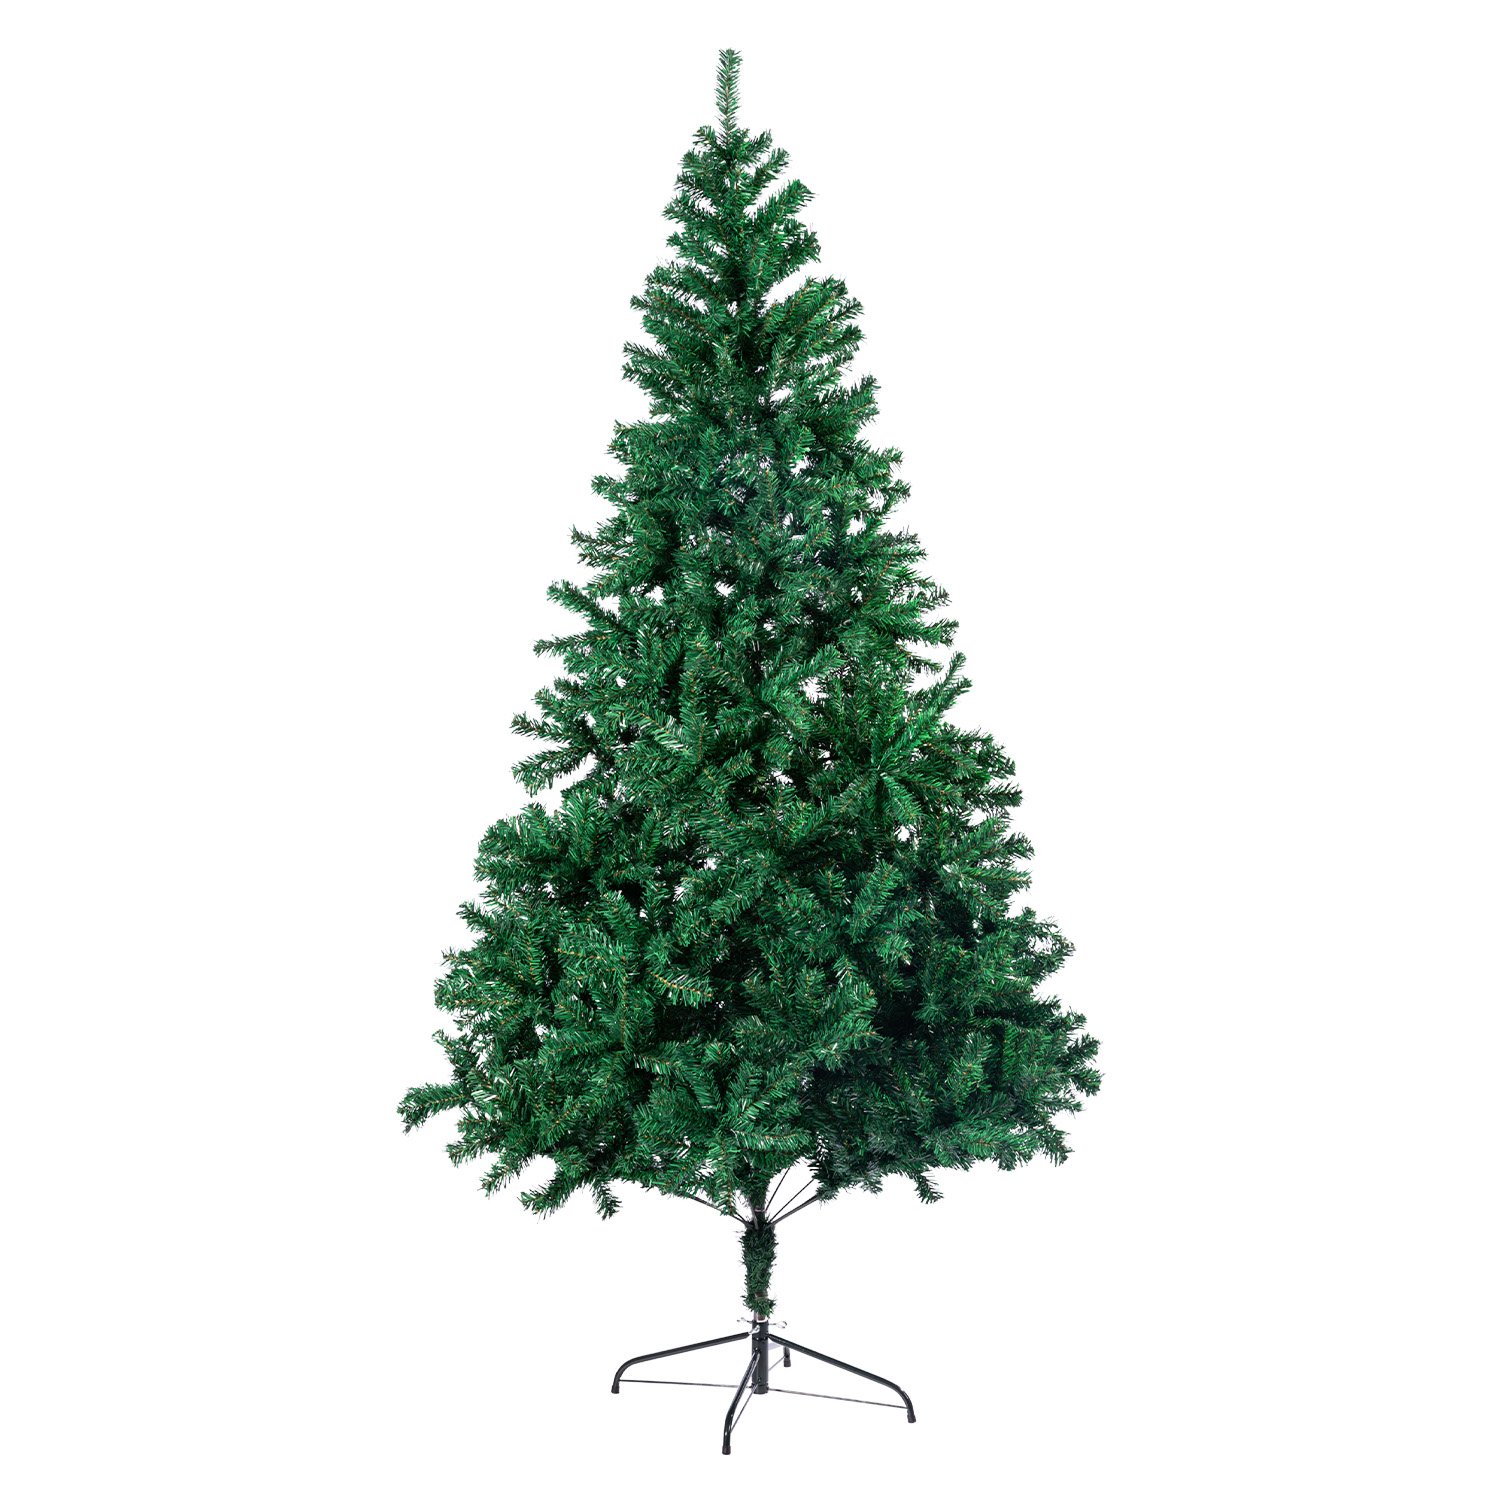 Christabelle Green Artificial Christmas Tree 1.2m - 300 Tips 2